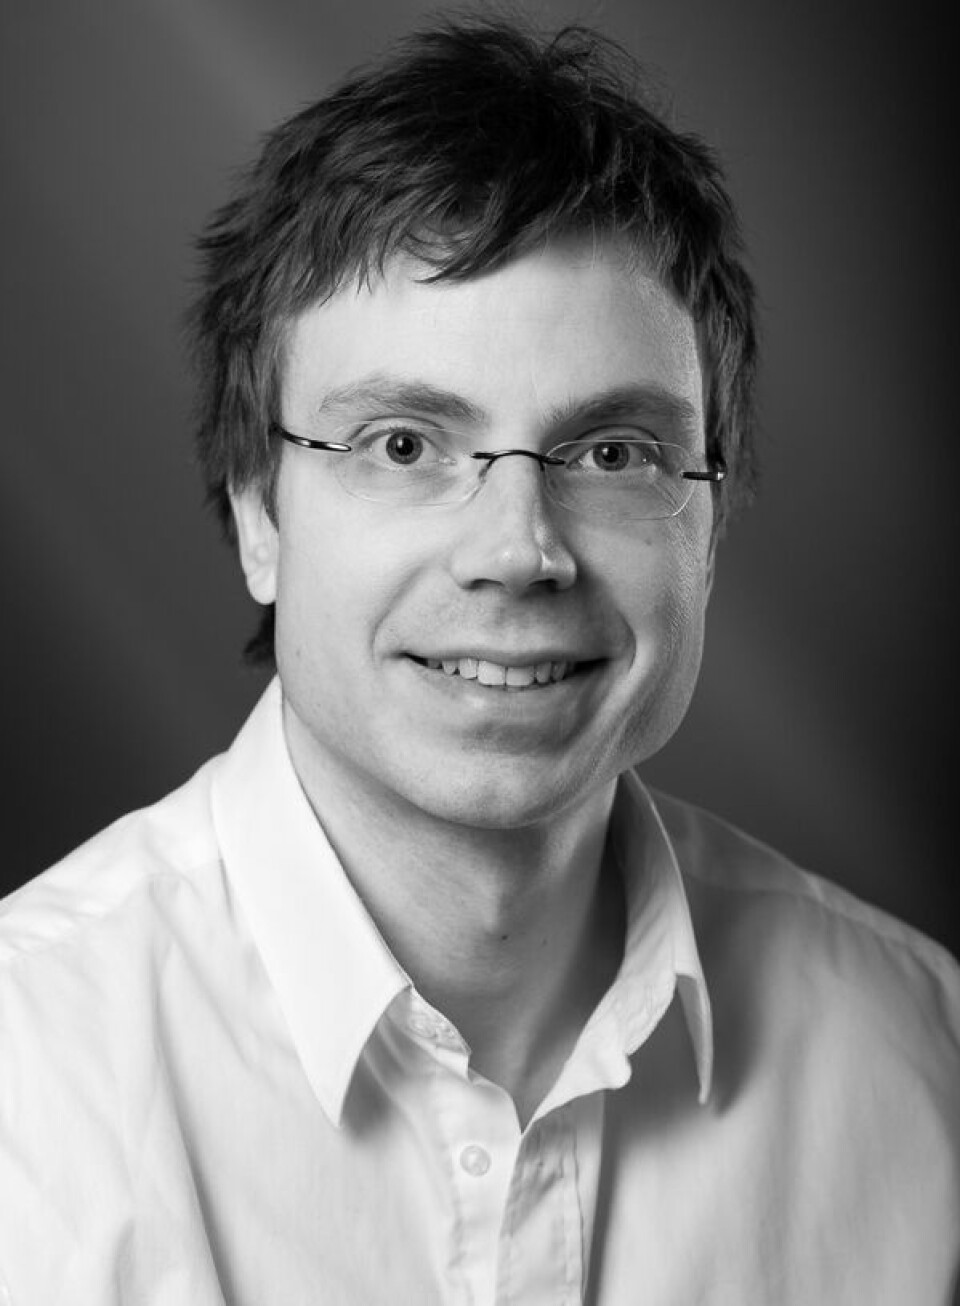 Andreas Lossius is an associate professor at the University of Oslo. He is researching MS and the Epstein-Barr virus.